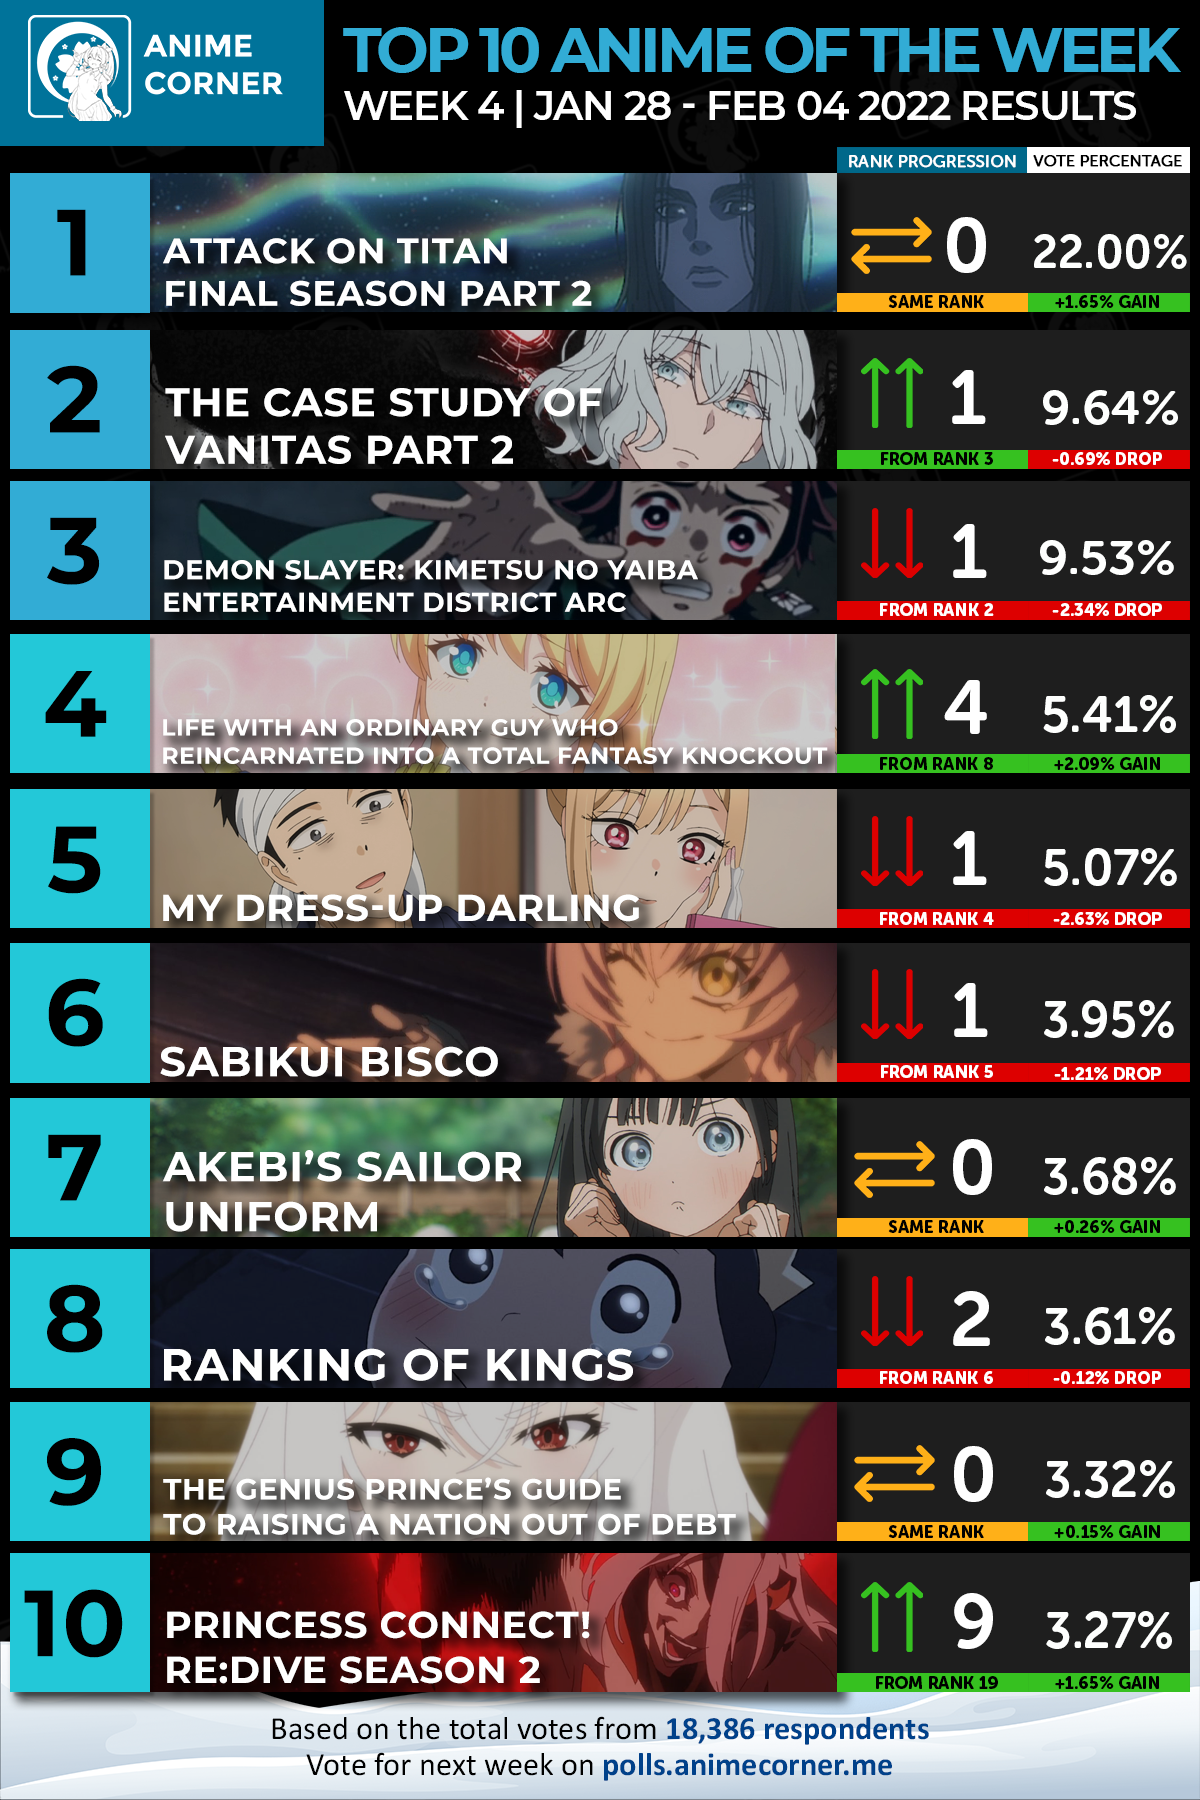 attack on titan ranks 1st 2nd week in row